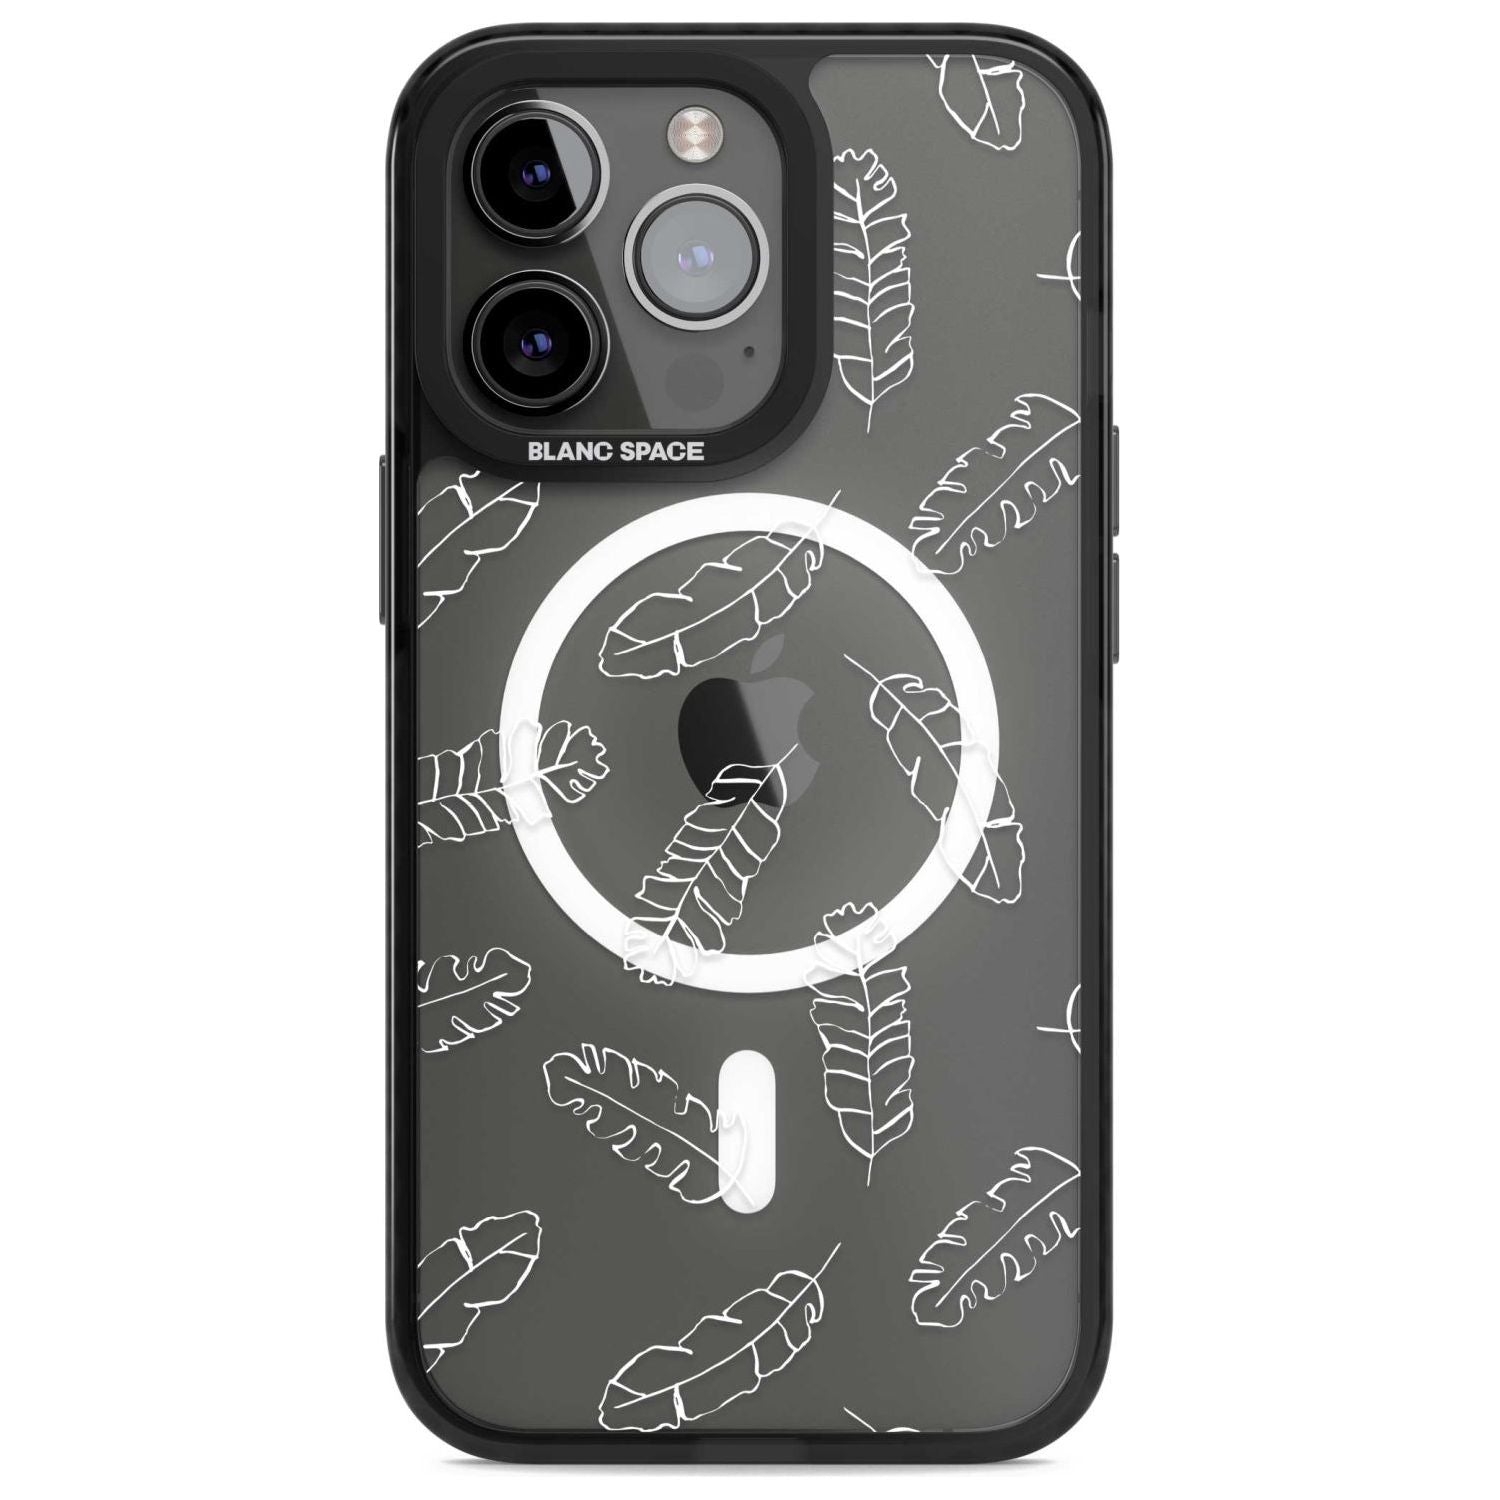 Clear Botanical Designs: Palm Leaves Phone Case iPhone 15 Pro Max / Magsafe Black Impact Case,iPhone 15 Pro / Magsafe Black Impact Case,iPhone 14 Pro Max / Magsafe Black Impact Case,iPhone 14 Pro / Magsafe Black Impact Case,iPhone 13 Pro / Magsafe Black Impact Case Blanc Space